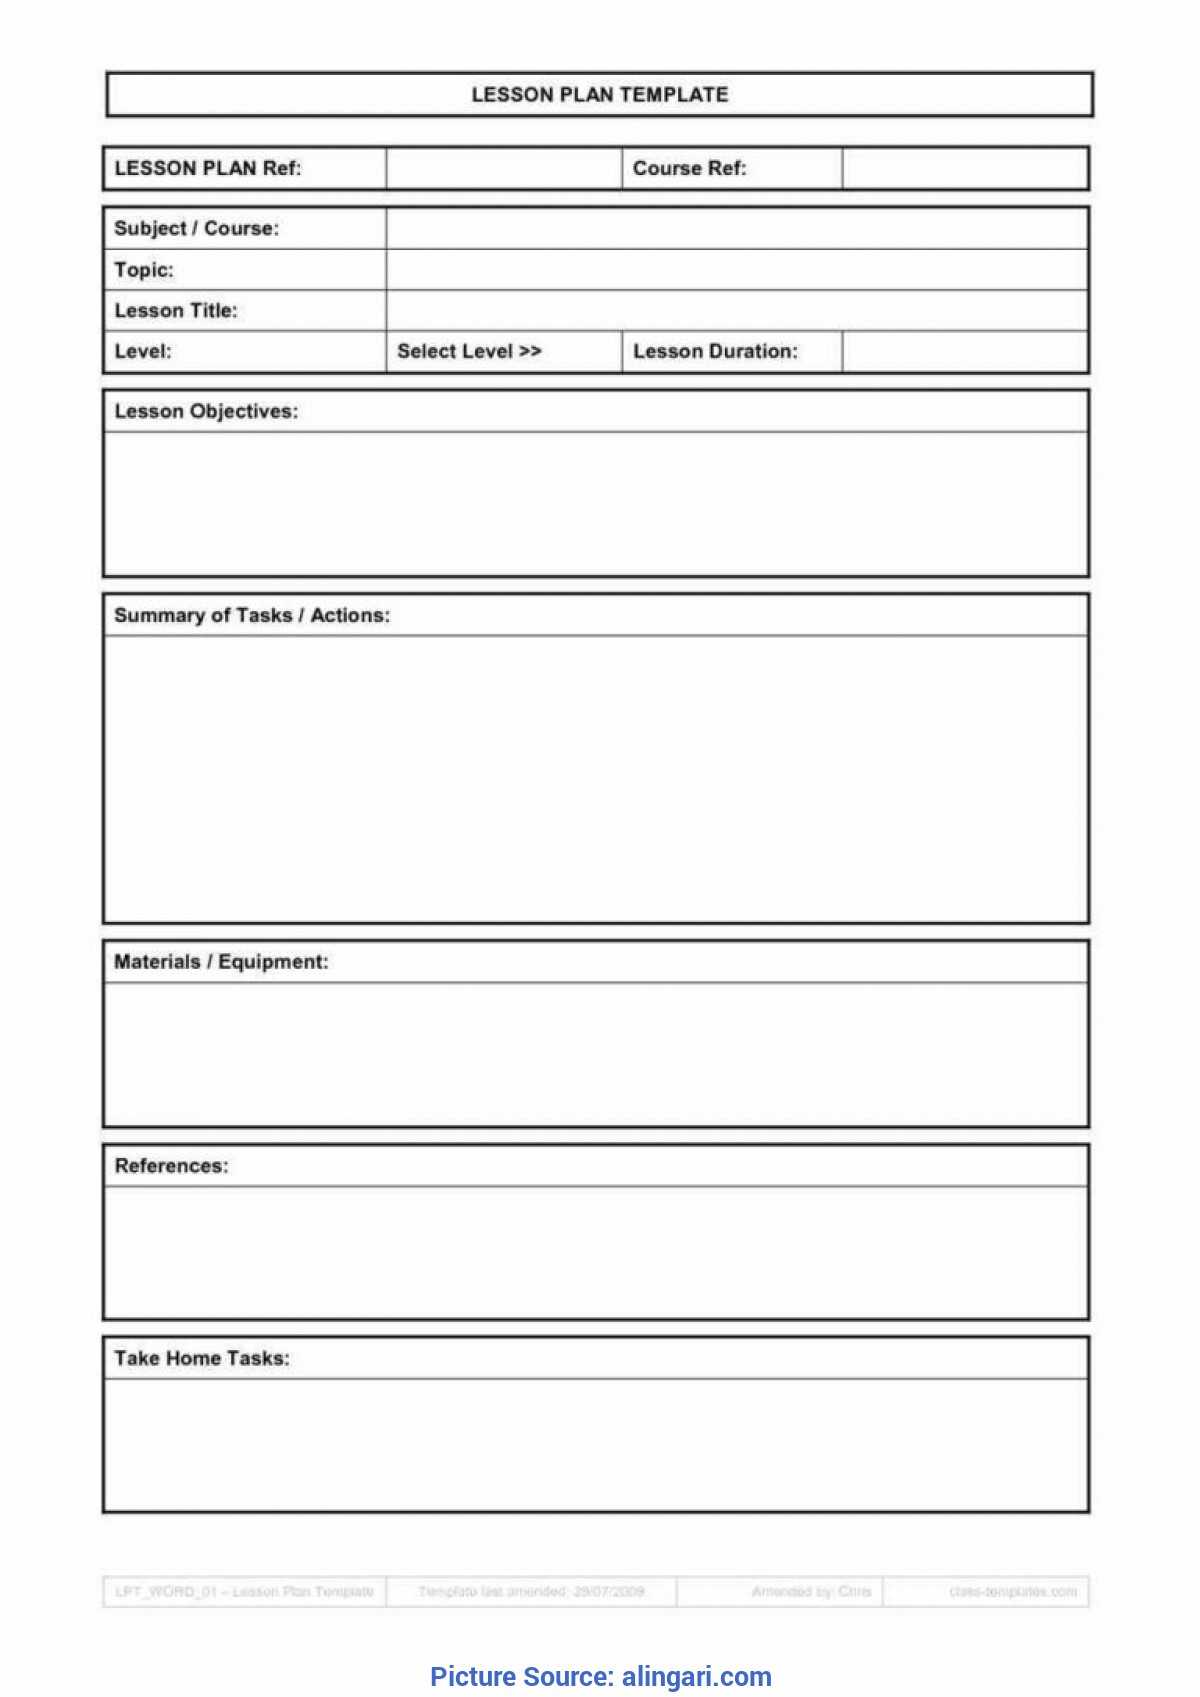 Prince2 Lessons Learned Report Template New 5 Lessons Le Intended For Prince2 Lessons Learned Report Template